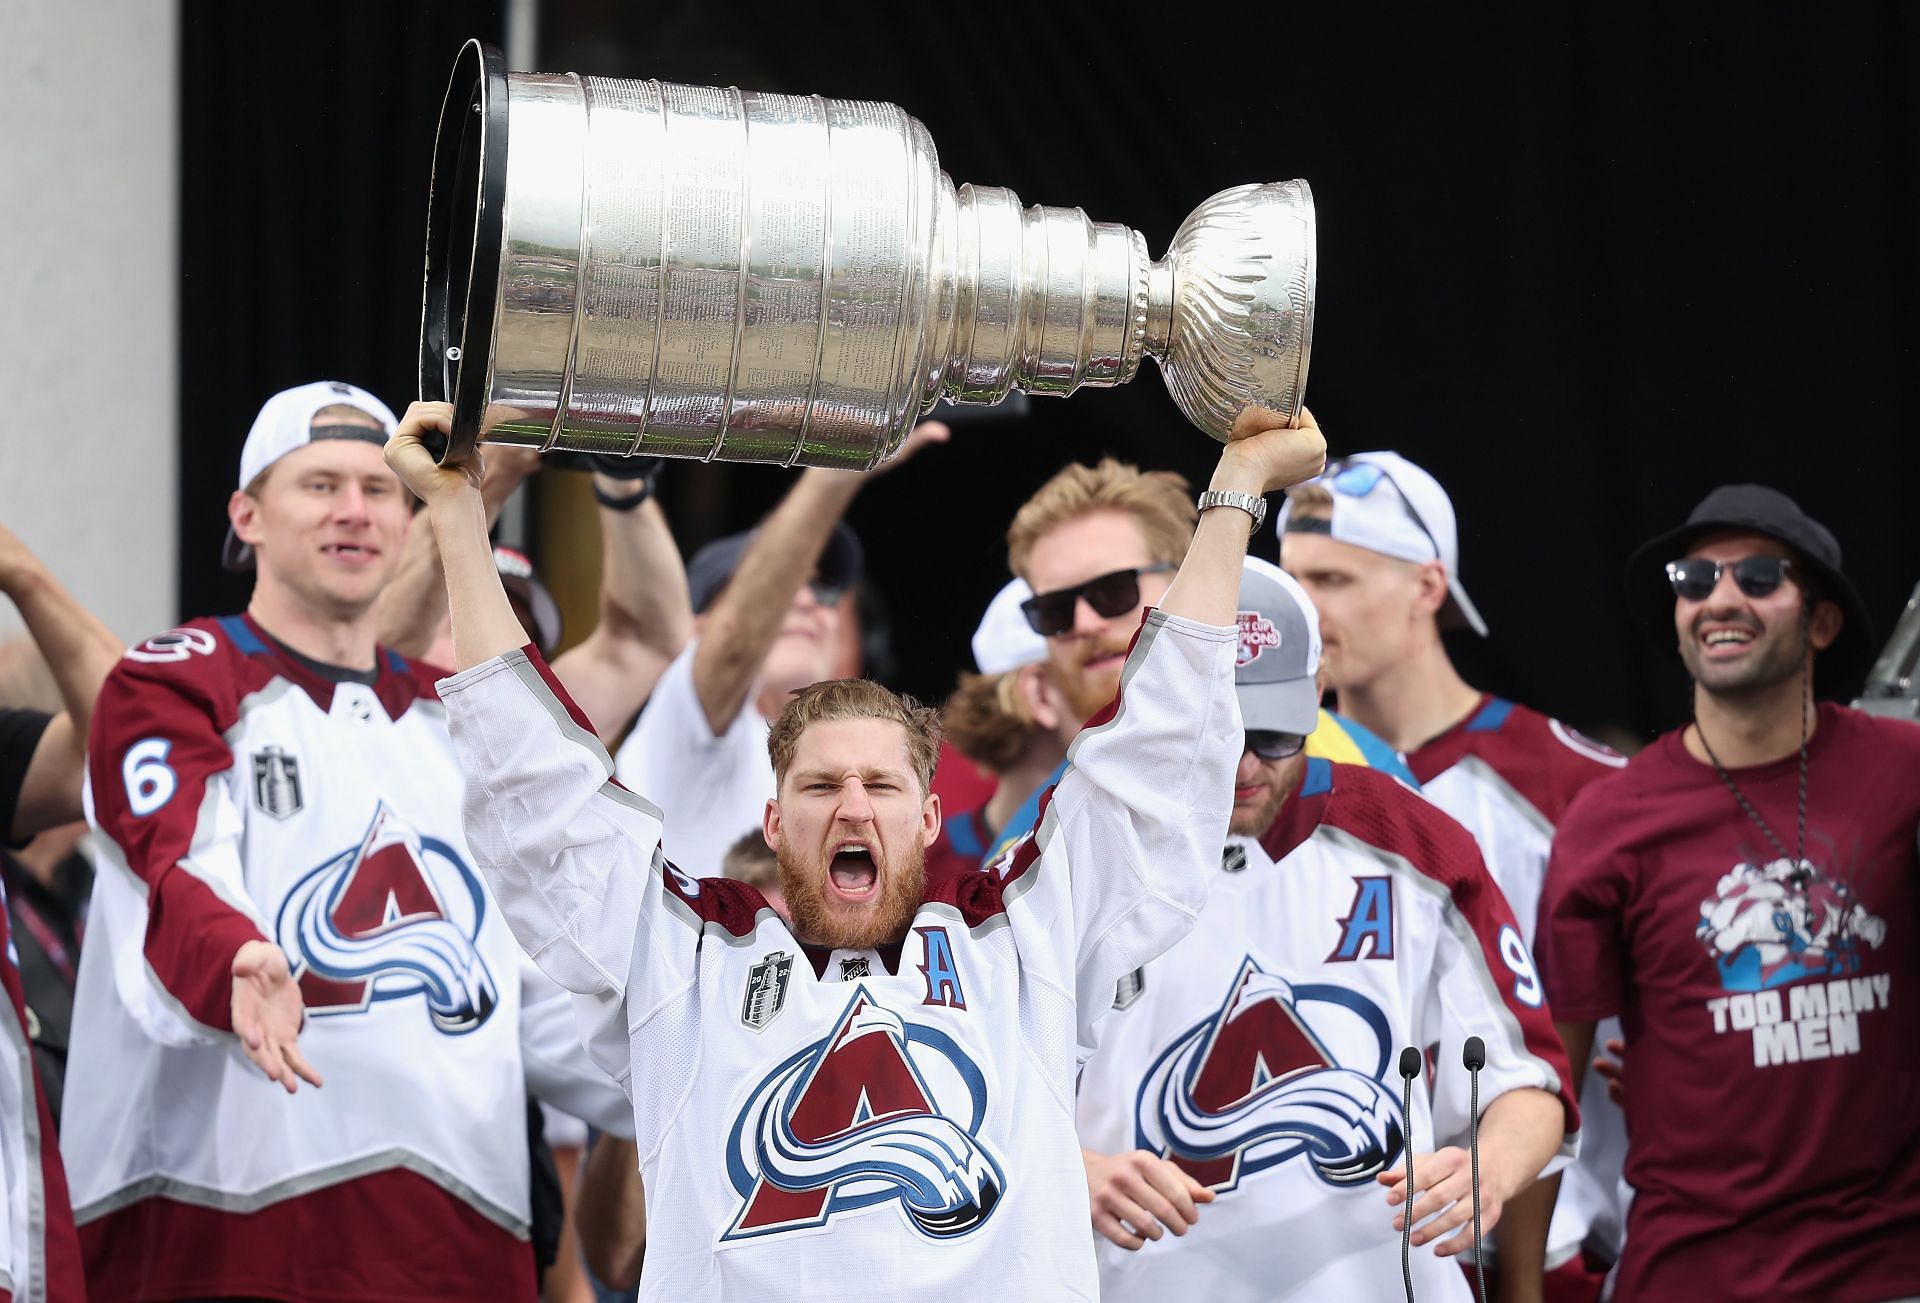 2021-22 Stanley Cup Champions Colorado Avalanche Jersey Team